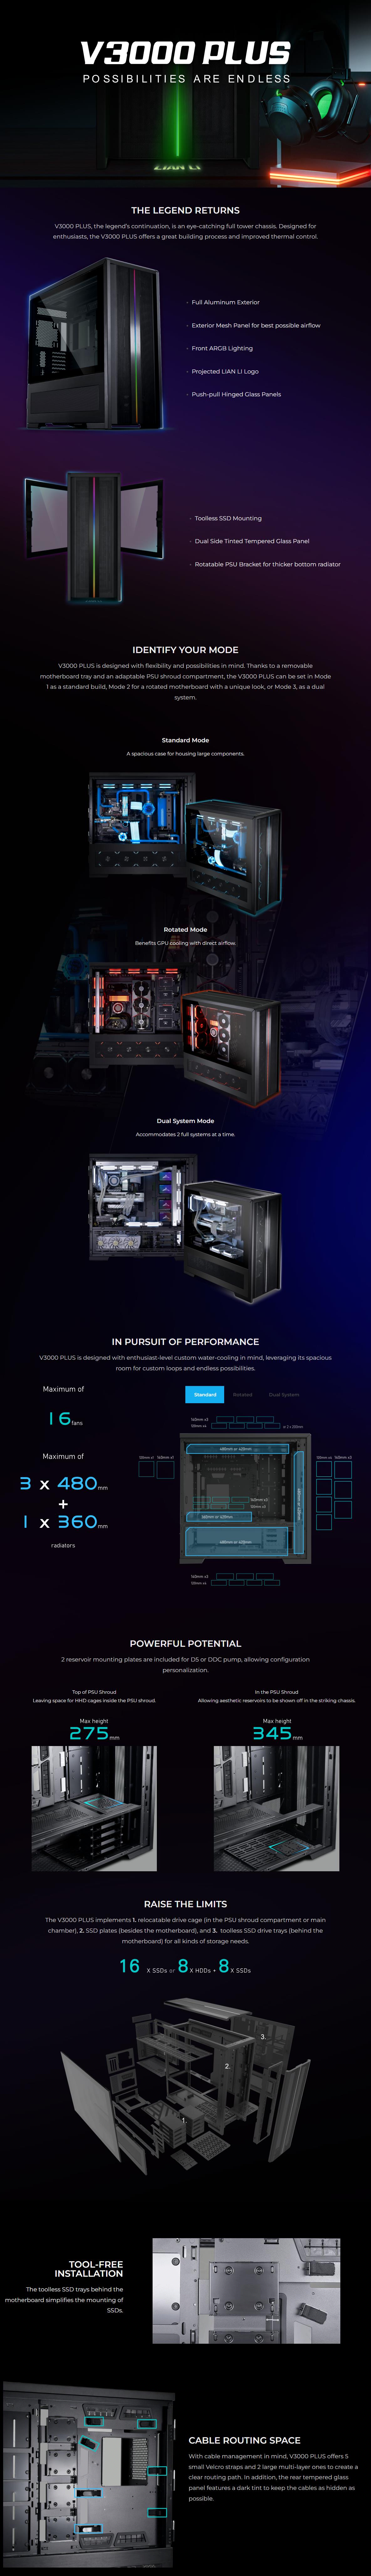 A large marketing image providing additional information about the product Lian Li V3000 Plus Full Tower Case - Black - Additional alt info not provided